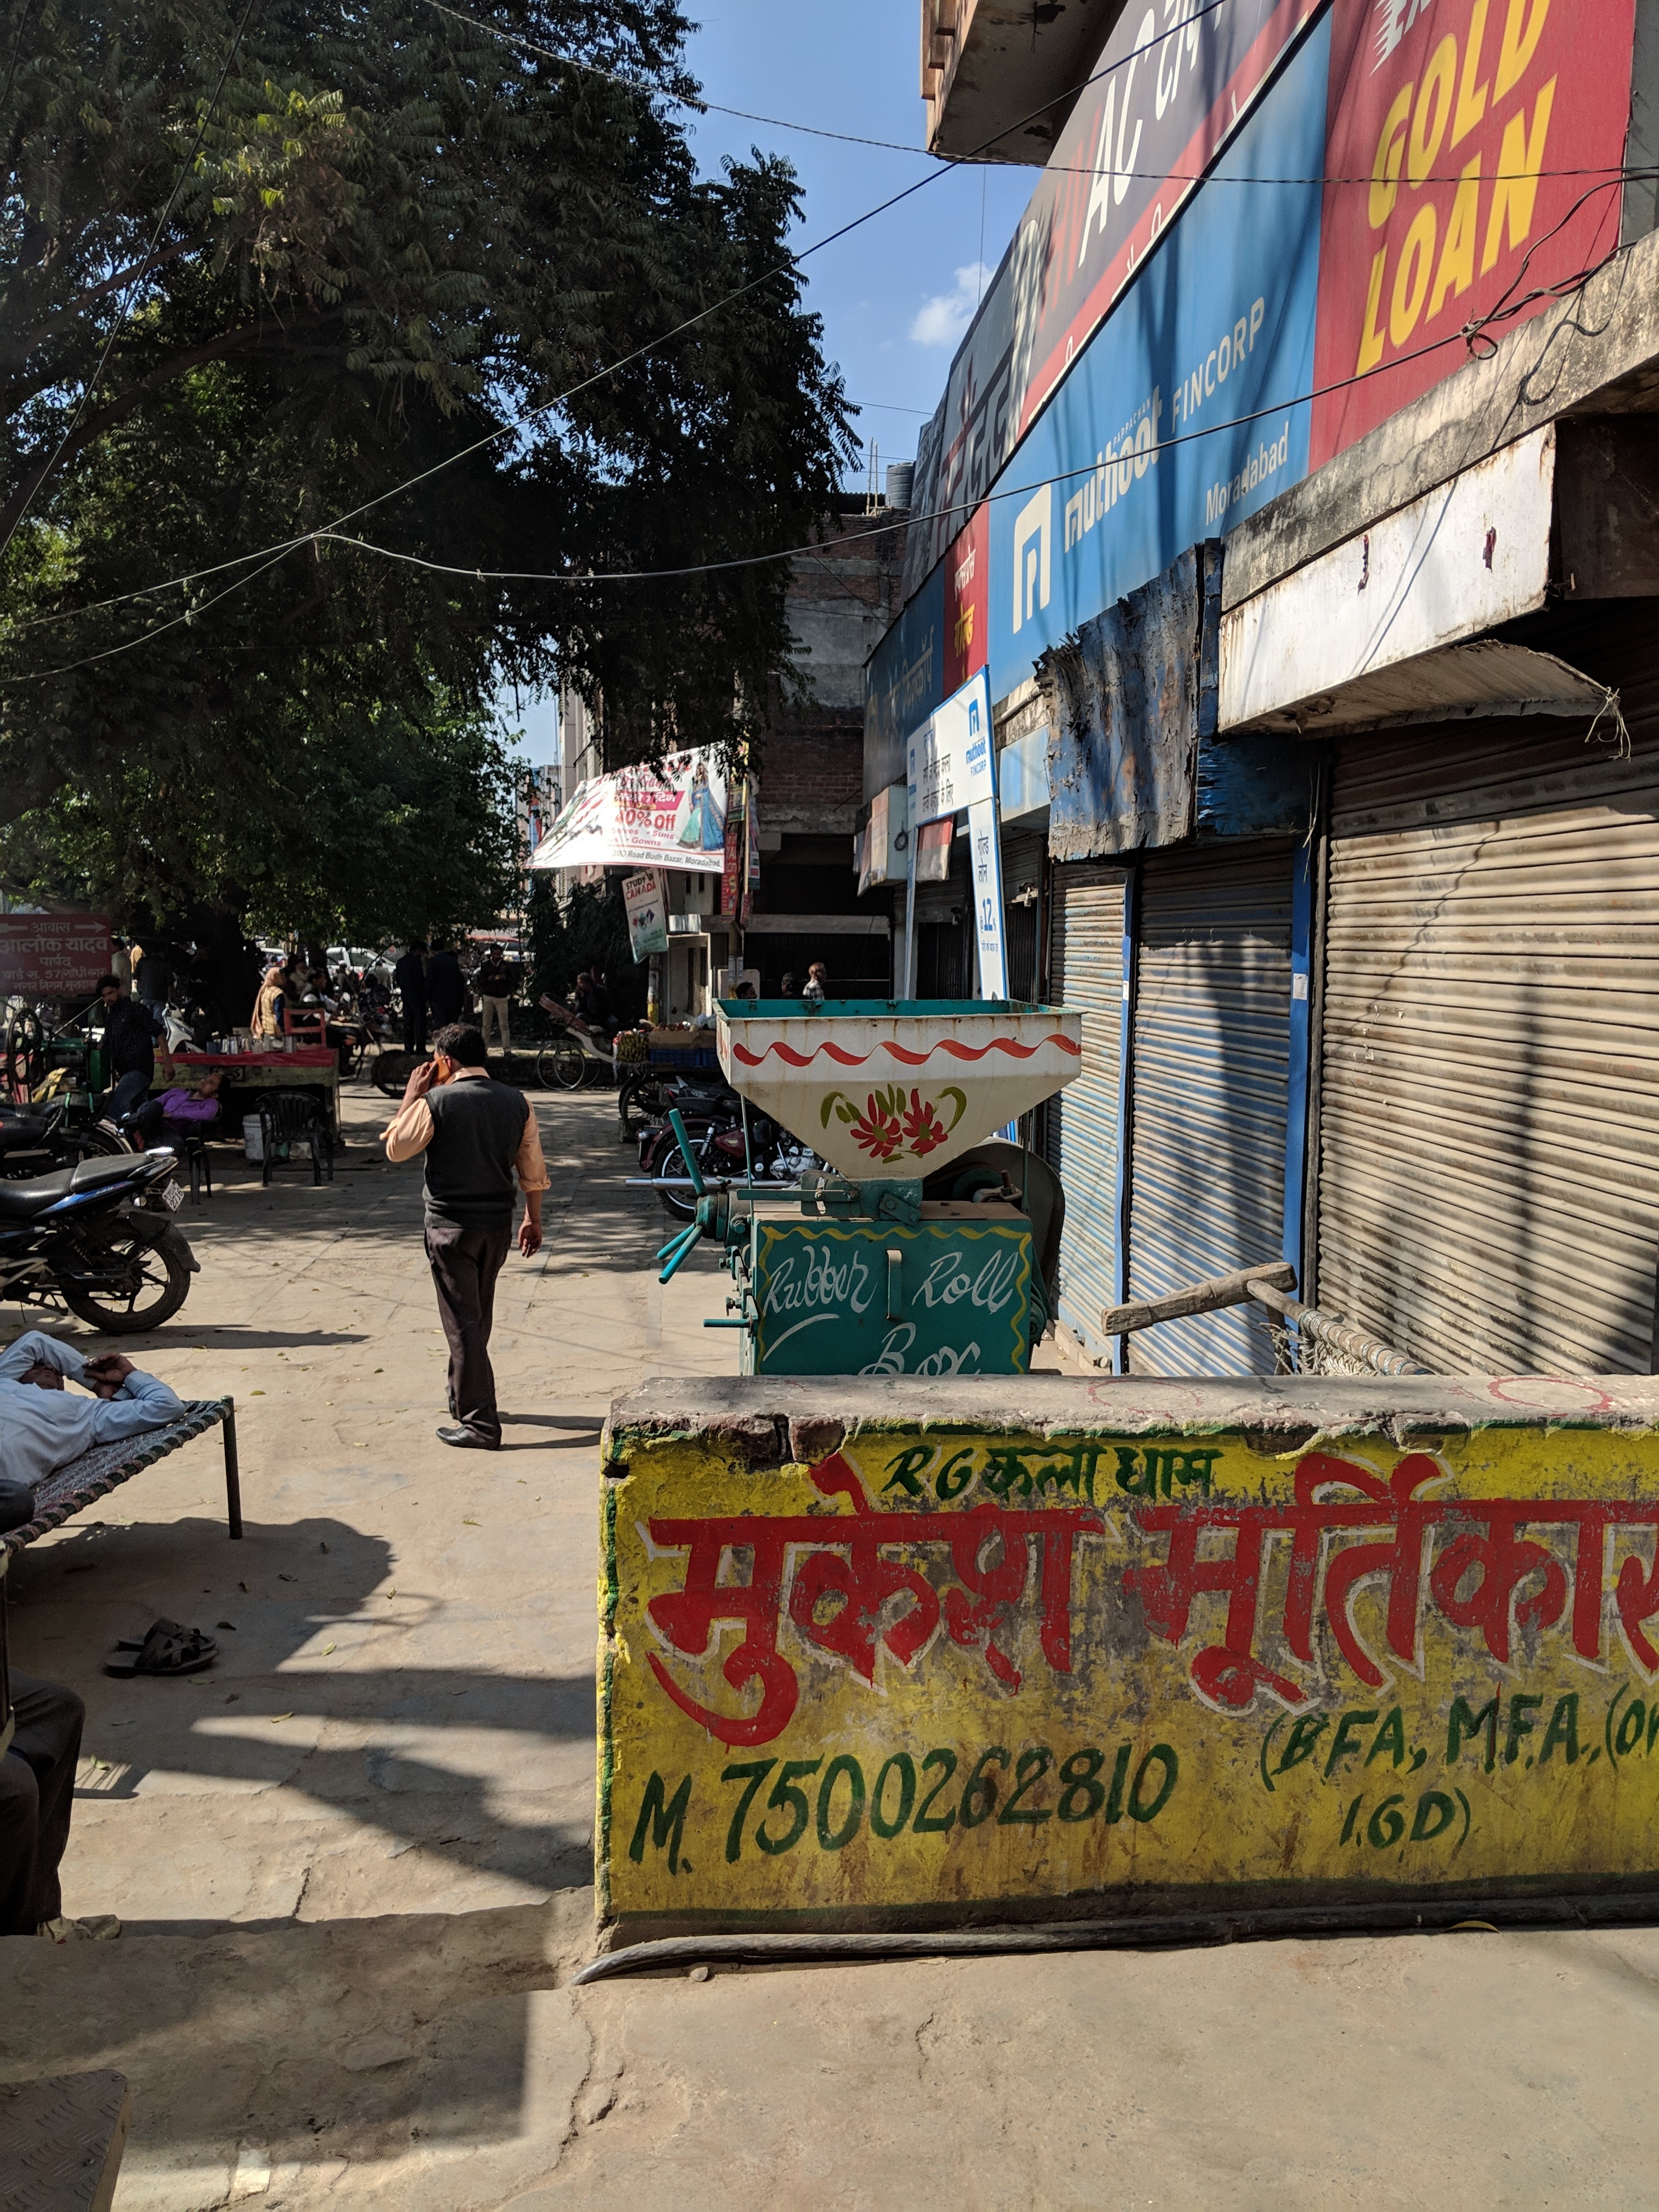 Photos and Videos of Muthoot Fincorp Gold Loan in Gandhi Nagar, Moradabad